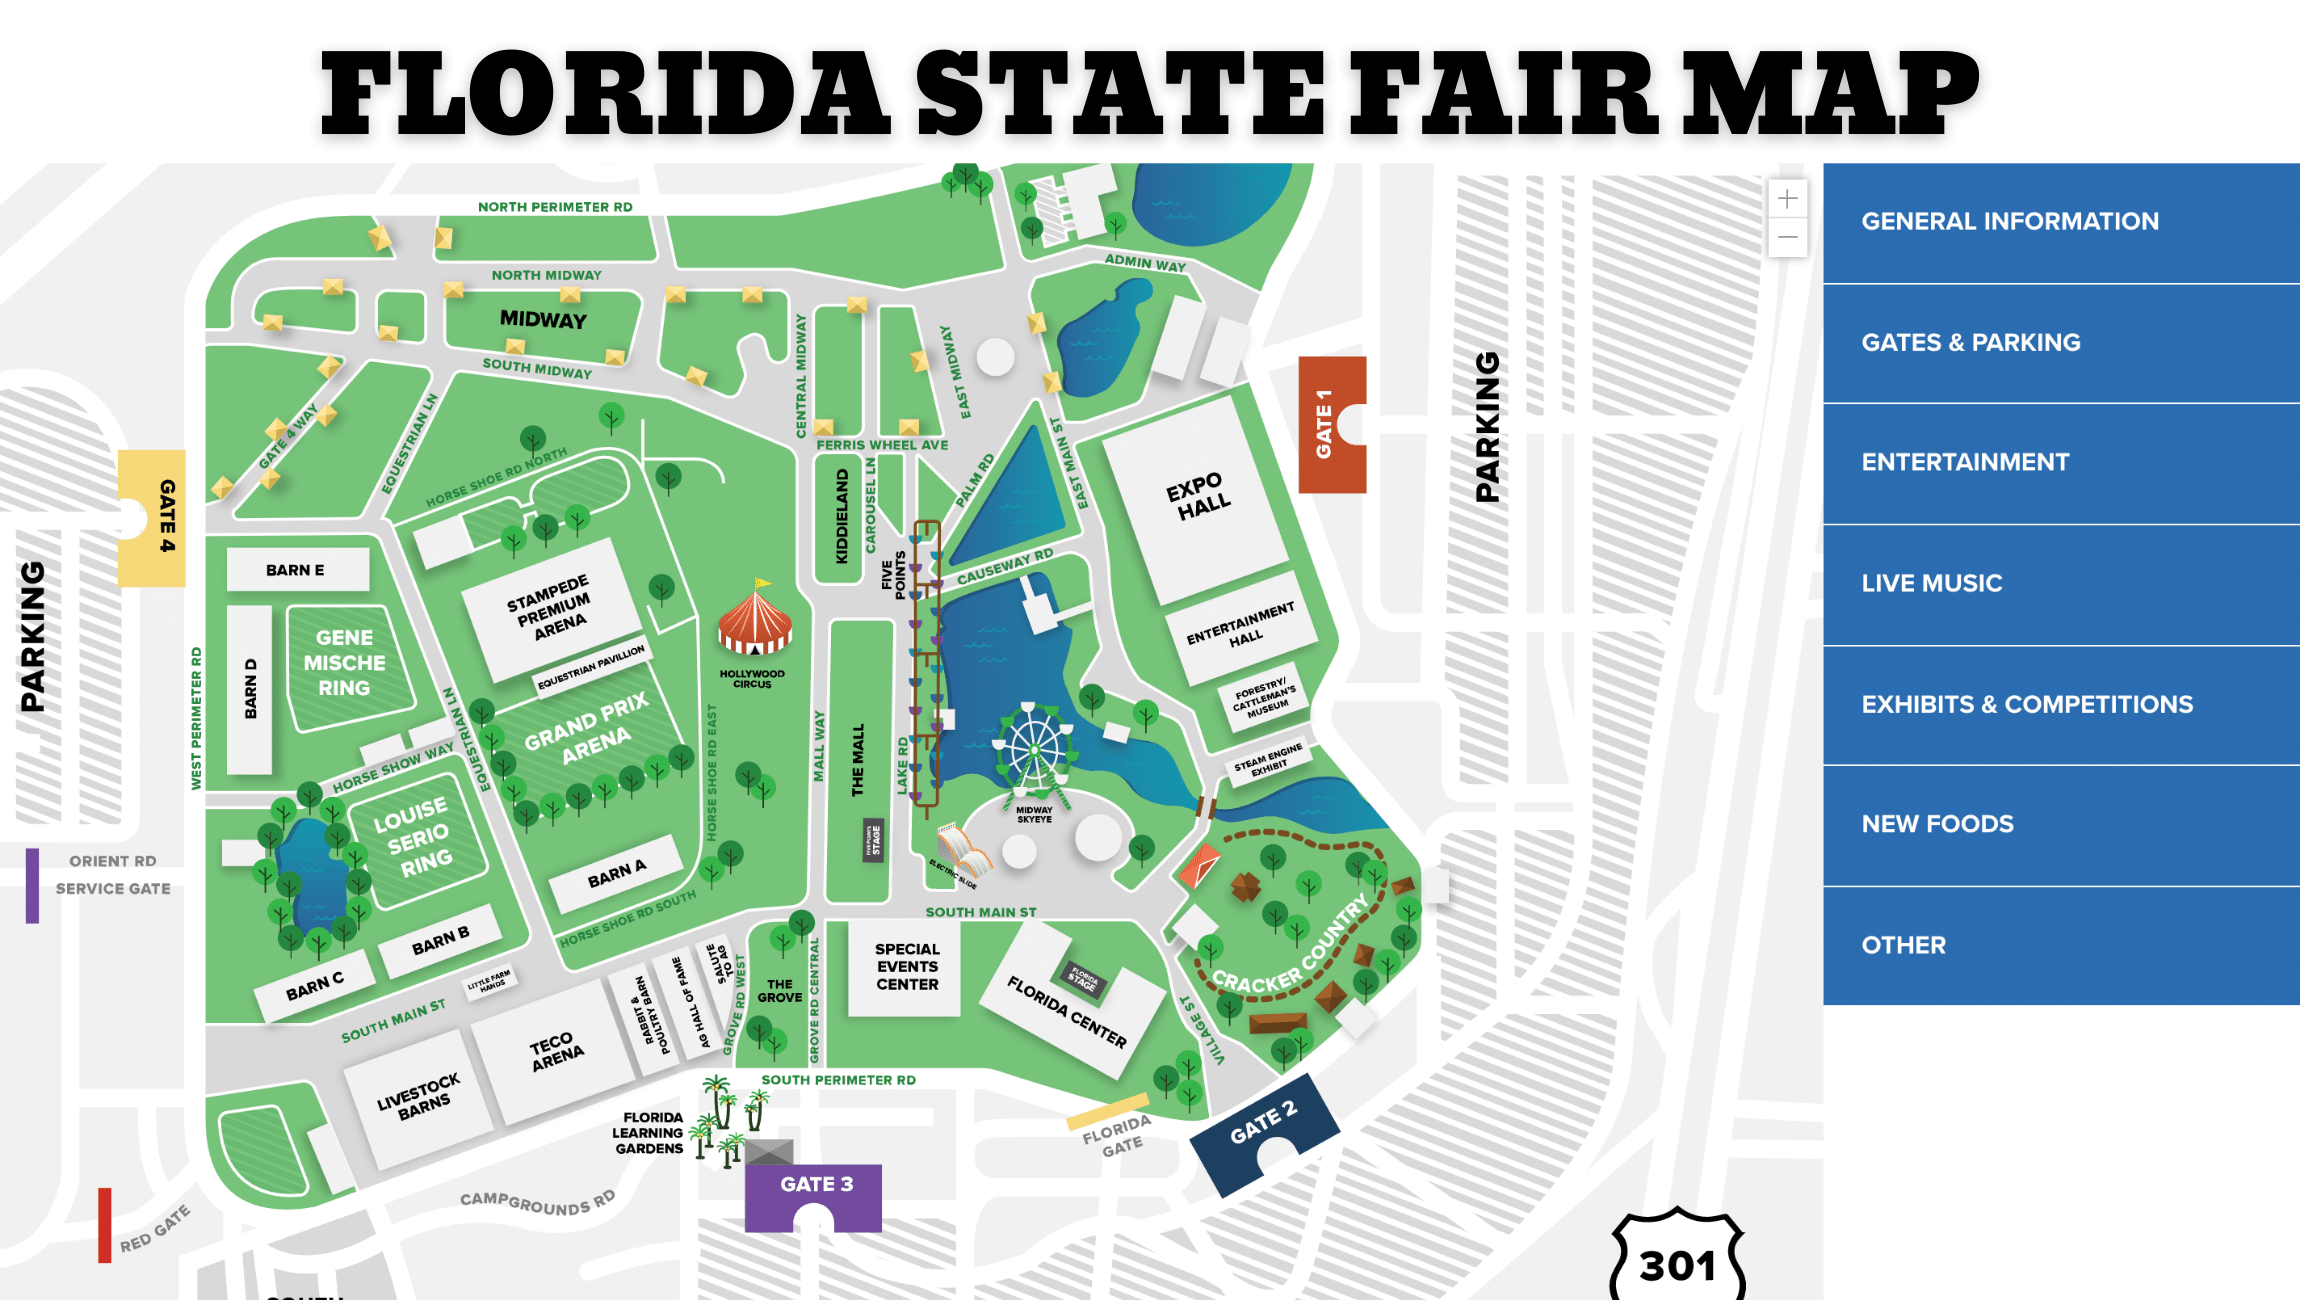 Indiana State Fair Map Florida State Fair Guide 2022: Tickets, Food, Concerts, Rides And More! -  Themeparkhipster